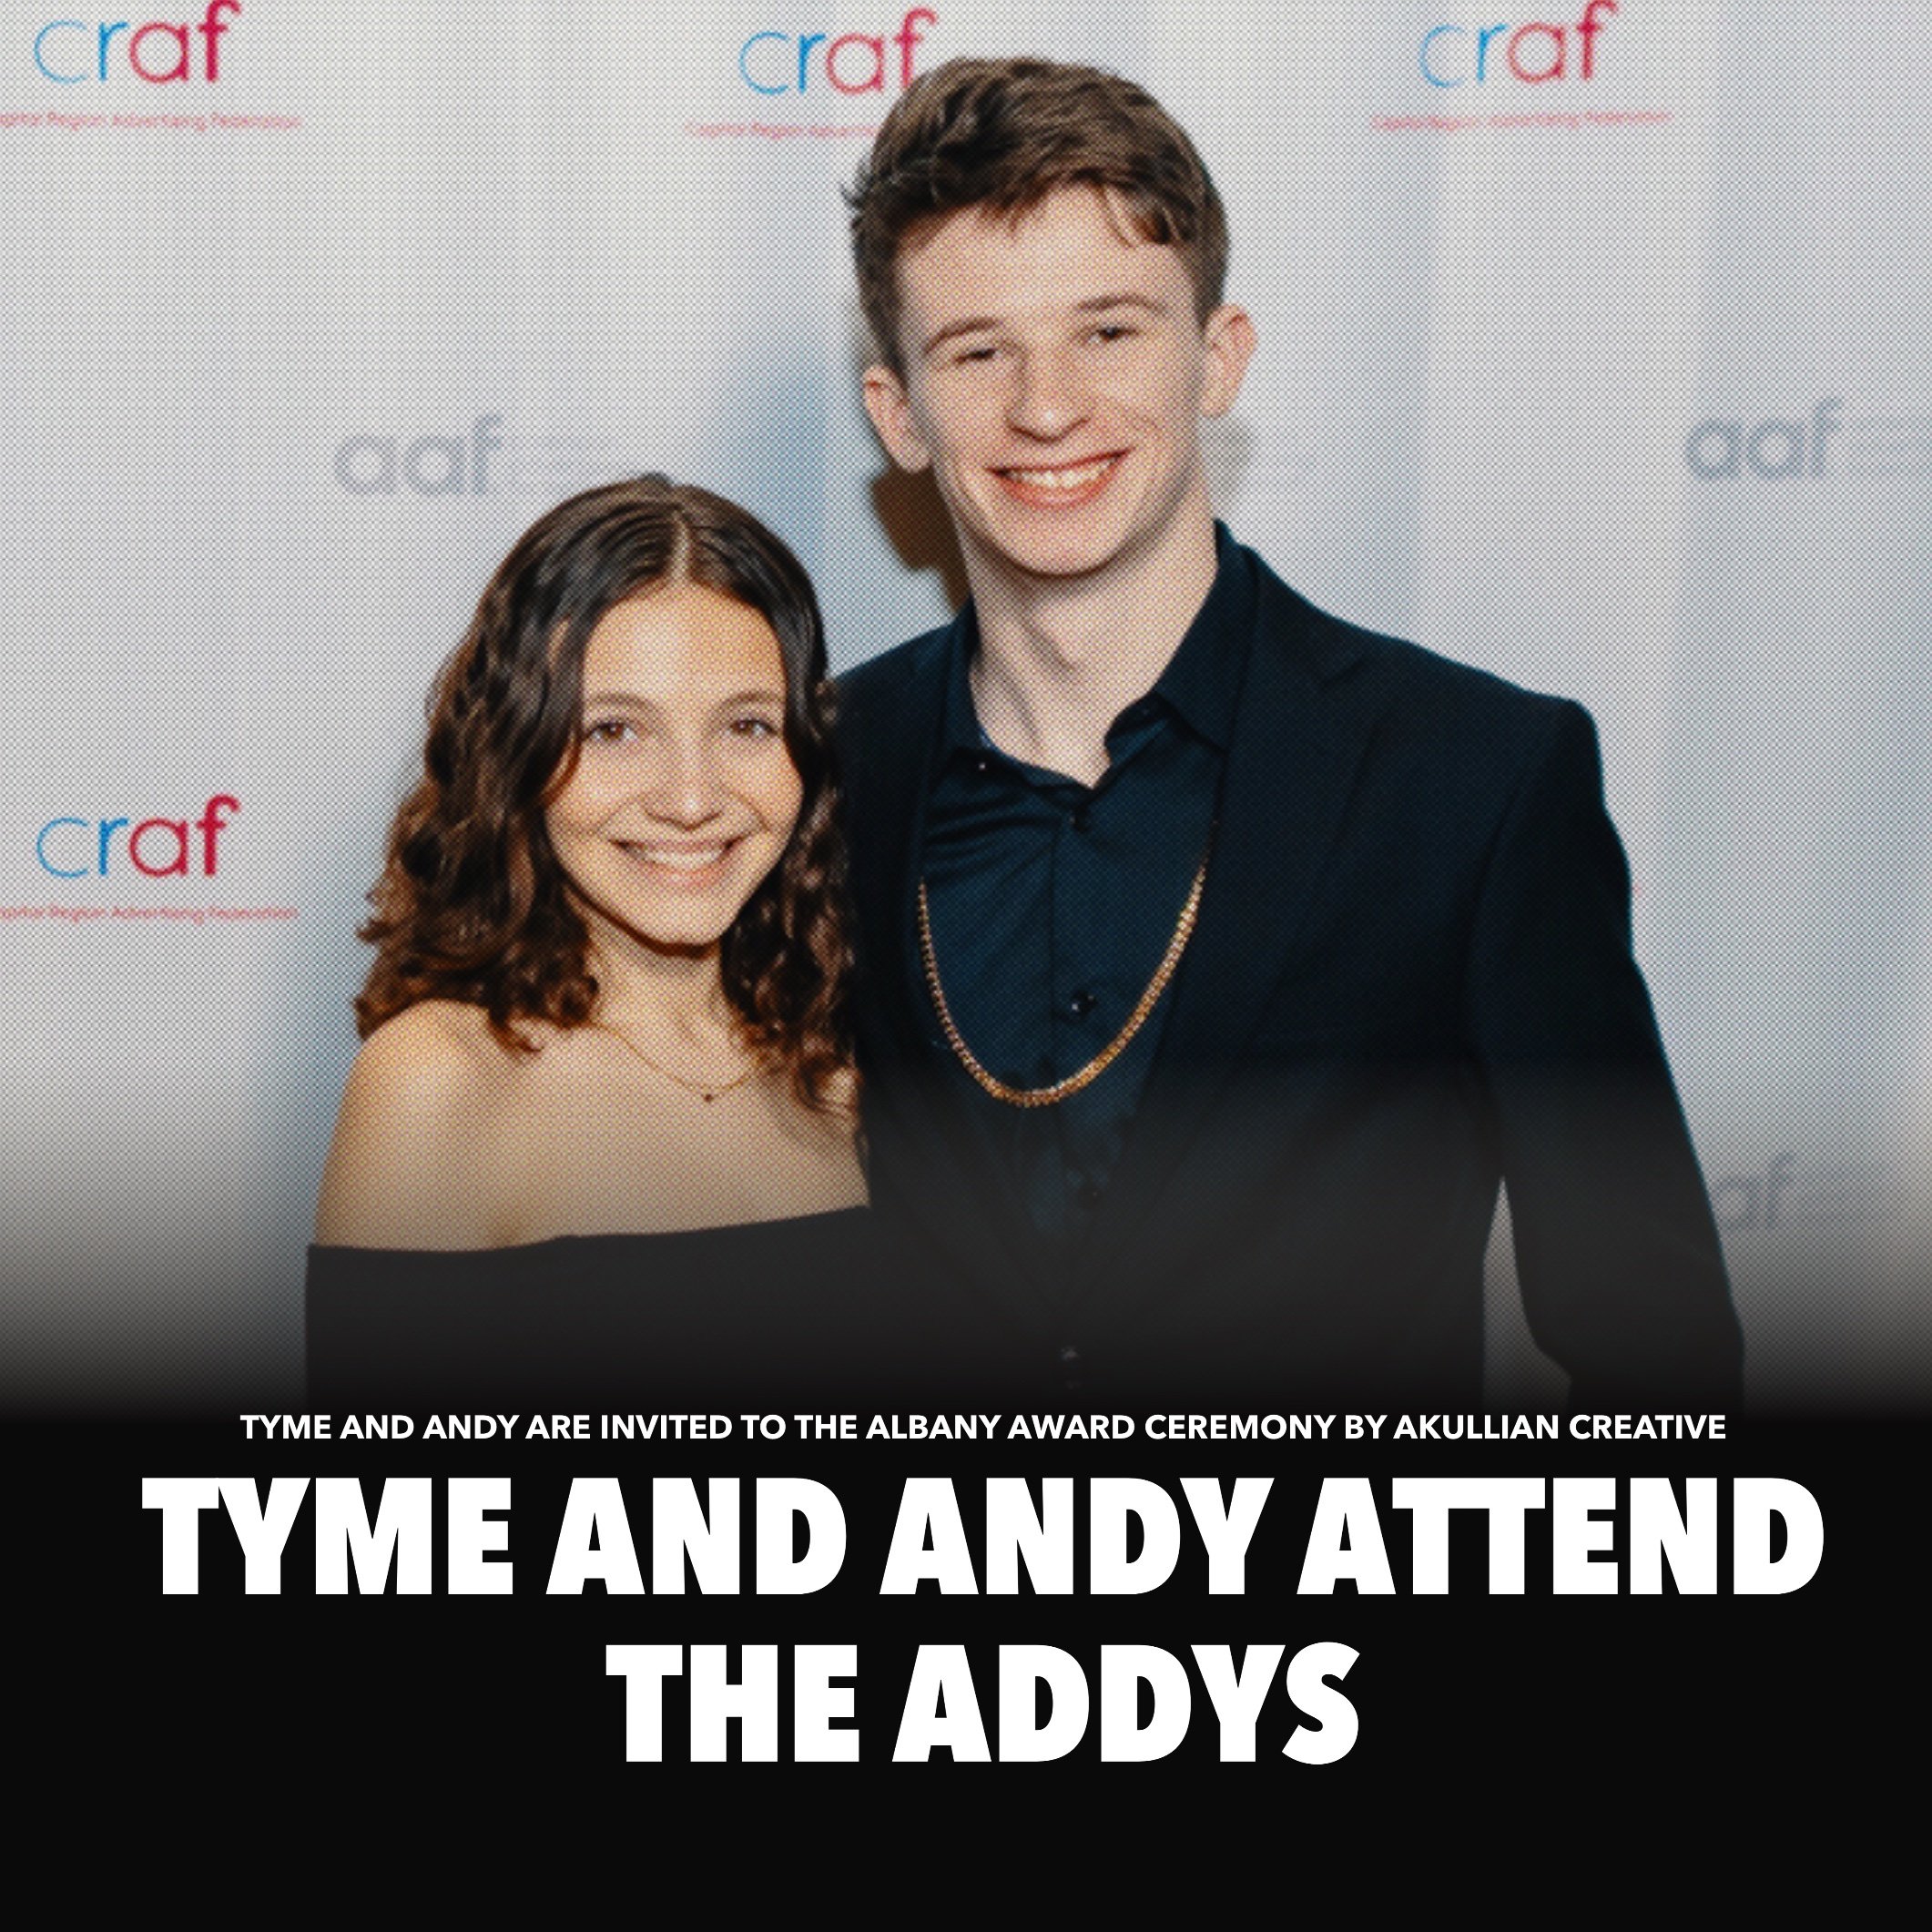 tyme and andy attend the addys capital district award ceremony .jpg